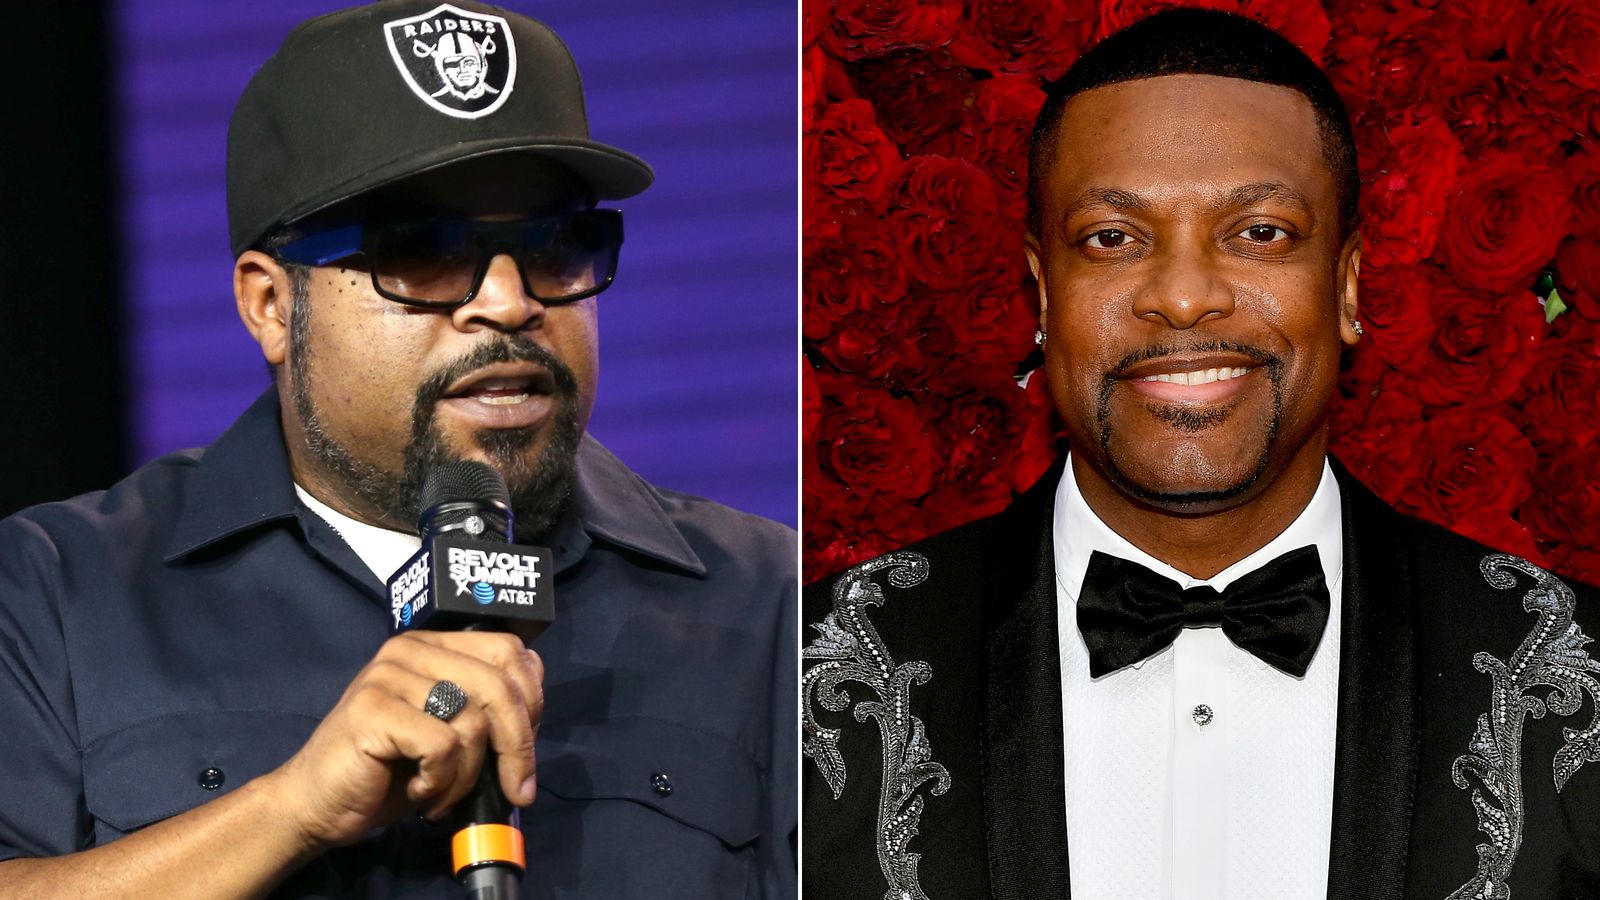 Ice Cube reveals Chris Tucker turned down $12M for role in 'Friday' sequel